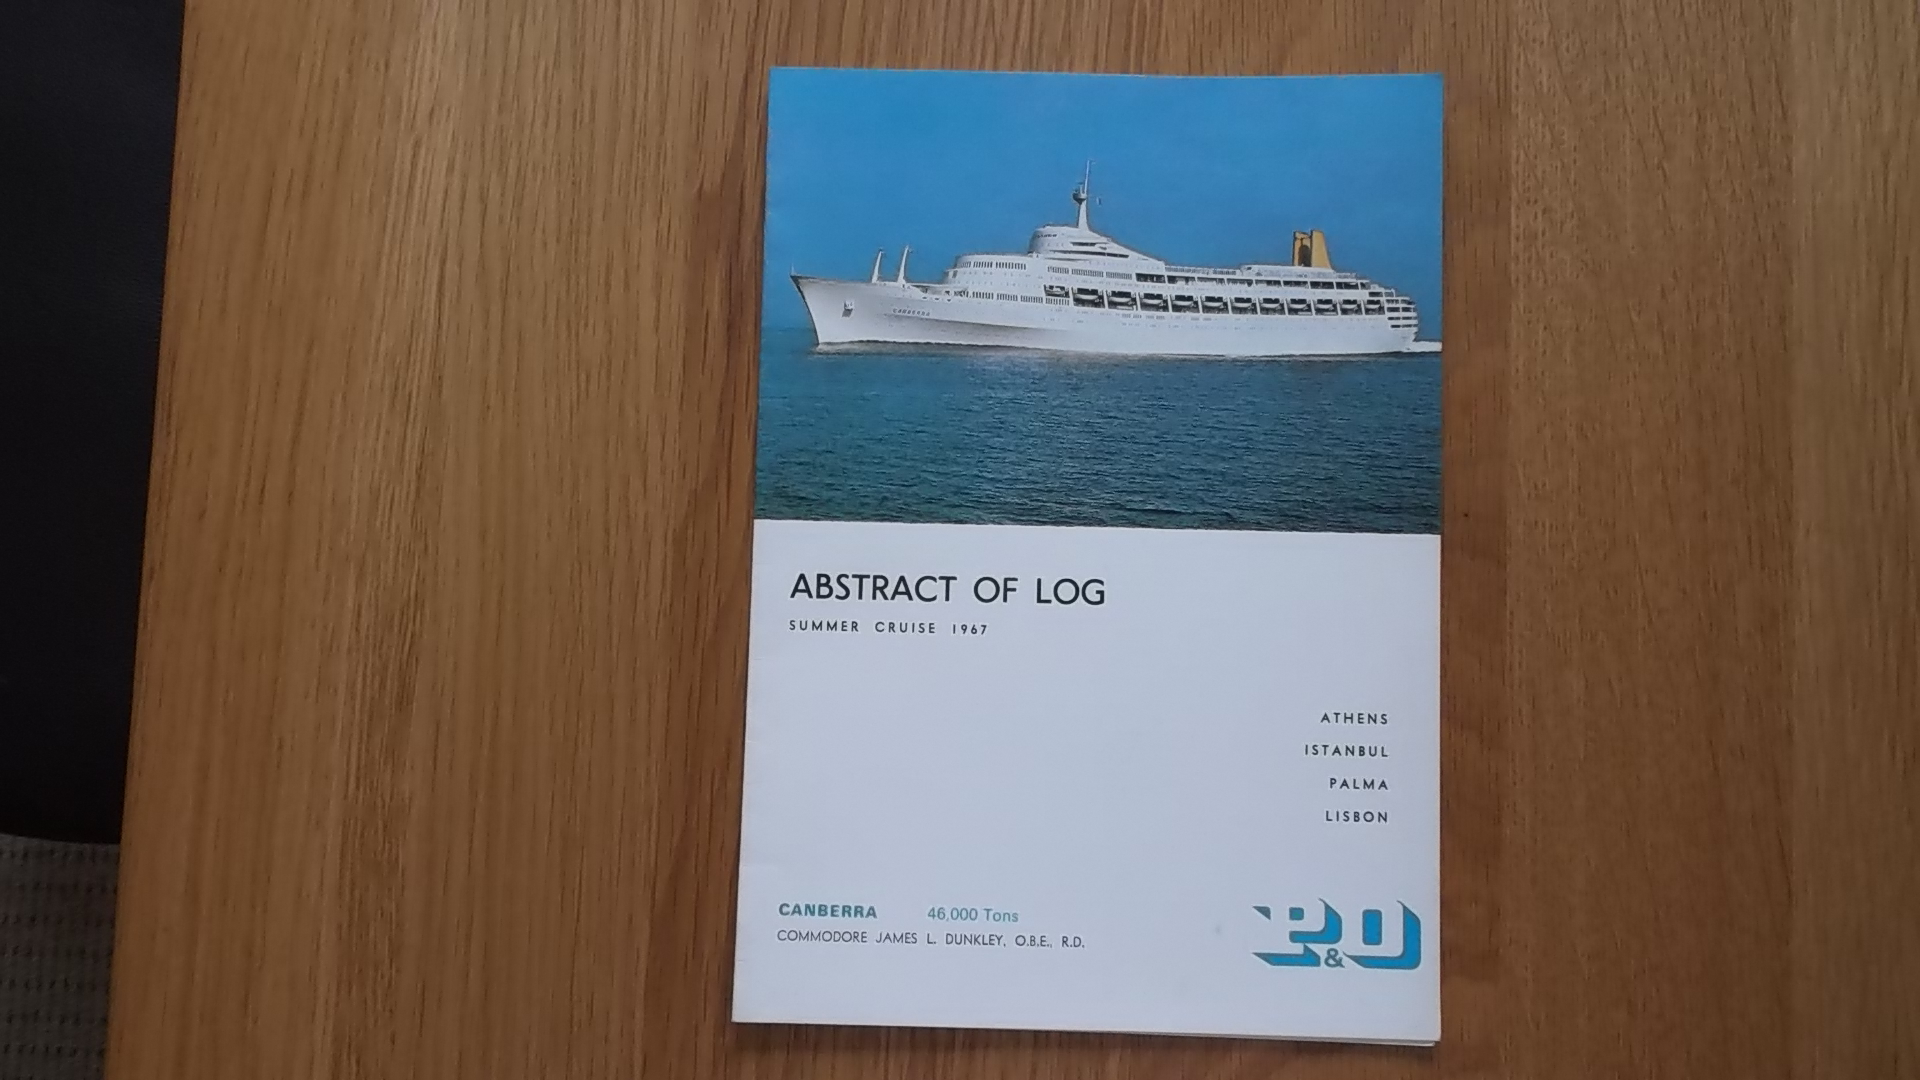 ABSTRACT OF LOG MENU FROM THE SS CANBERRA DATED 1967